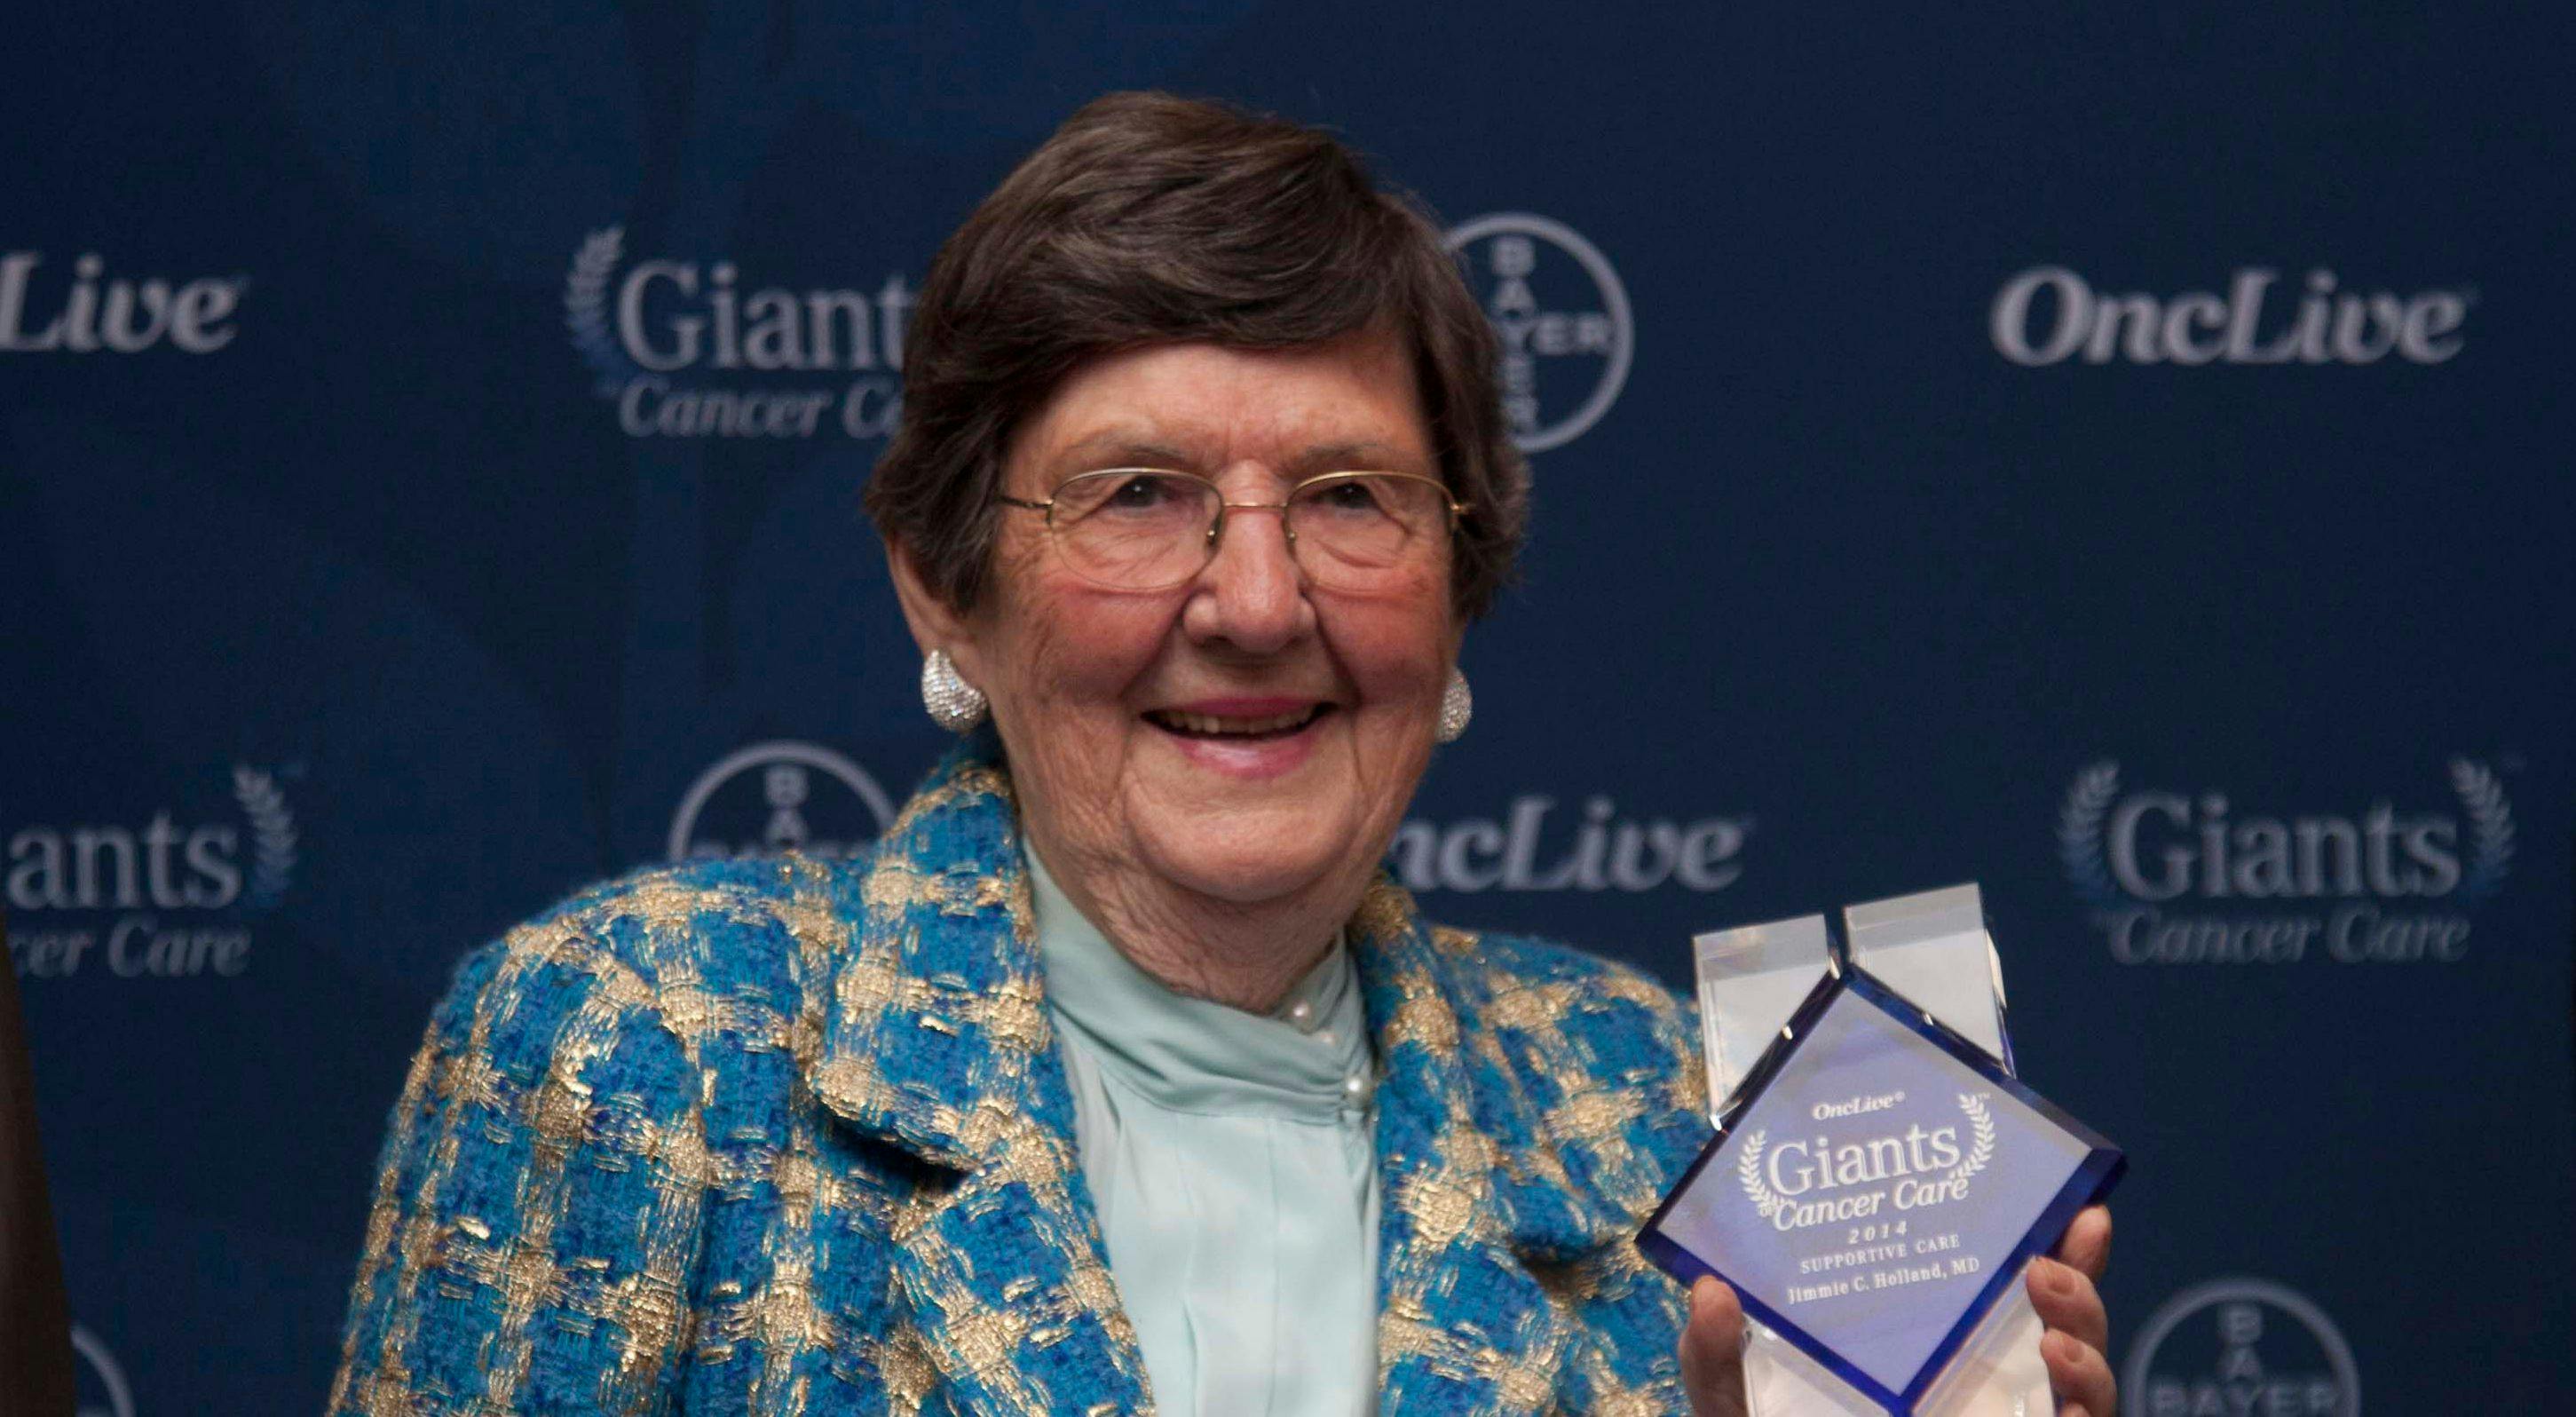 Holland receiving the Giants of Cancer Care award in 2014.